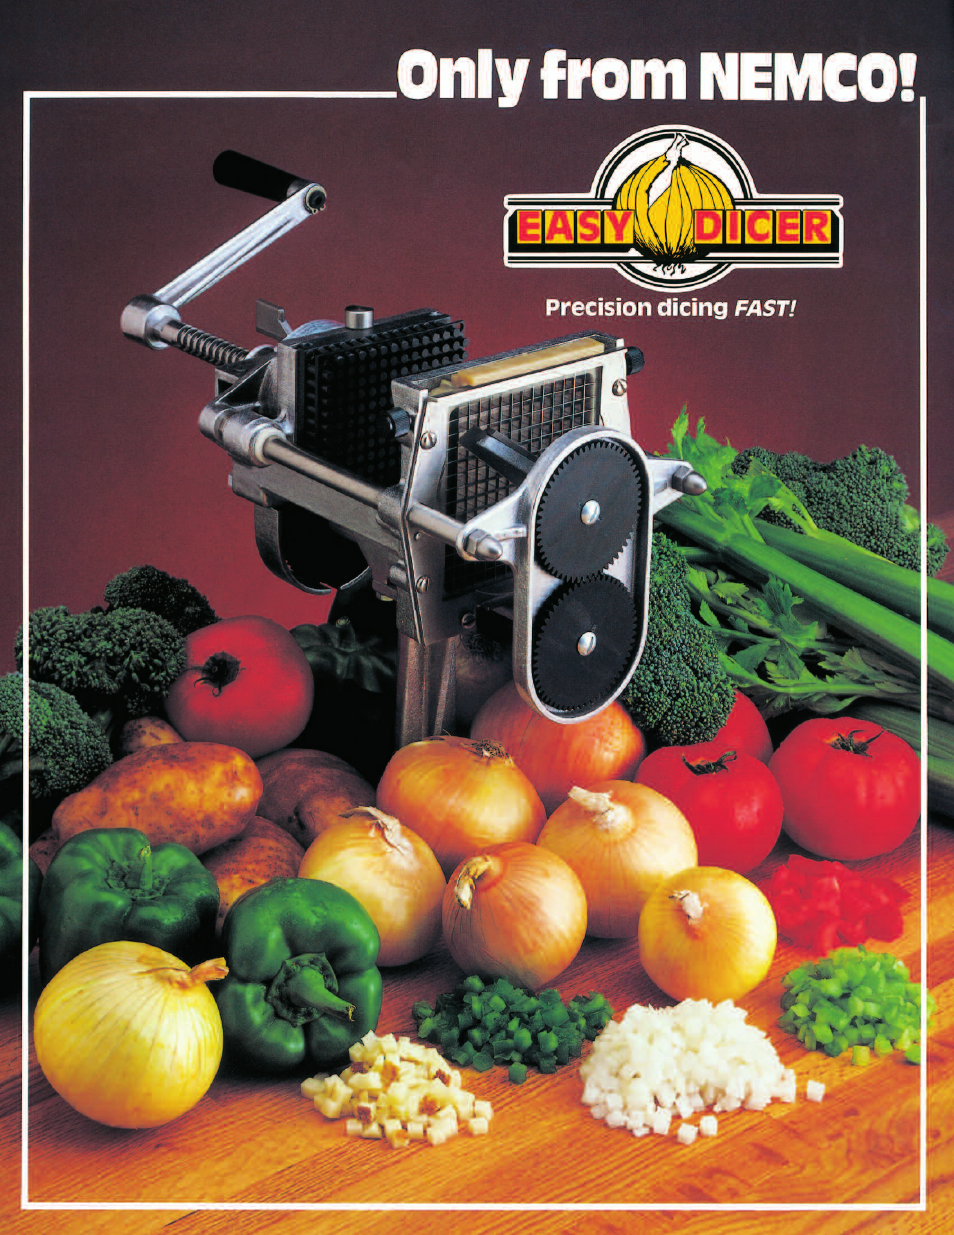 Easy Dicer Two-Way Vegetable Cutter - Spec Sheet